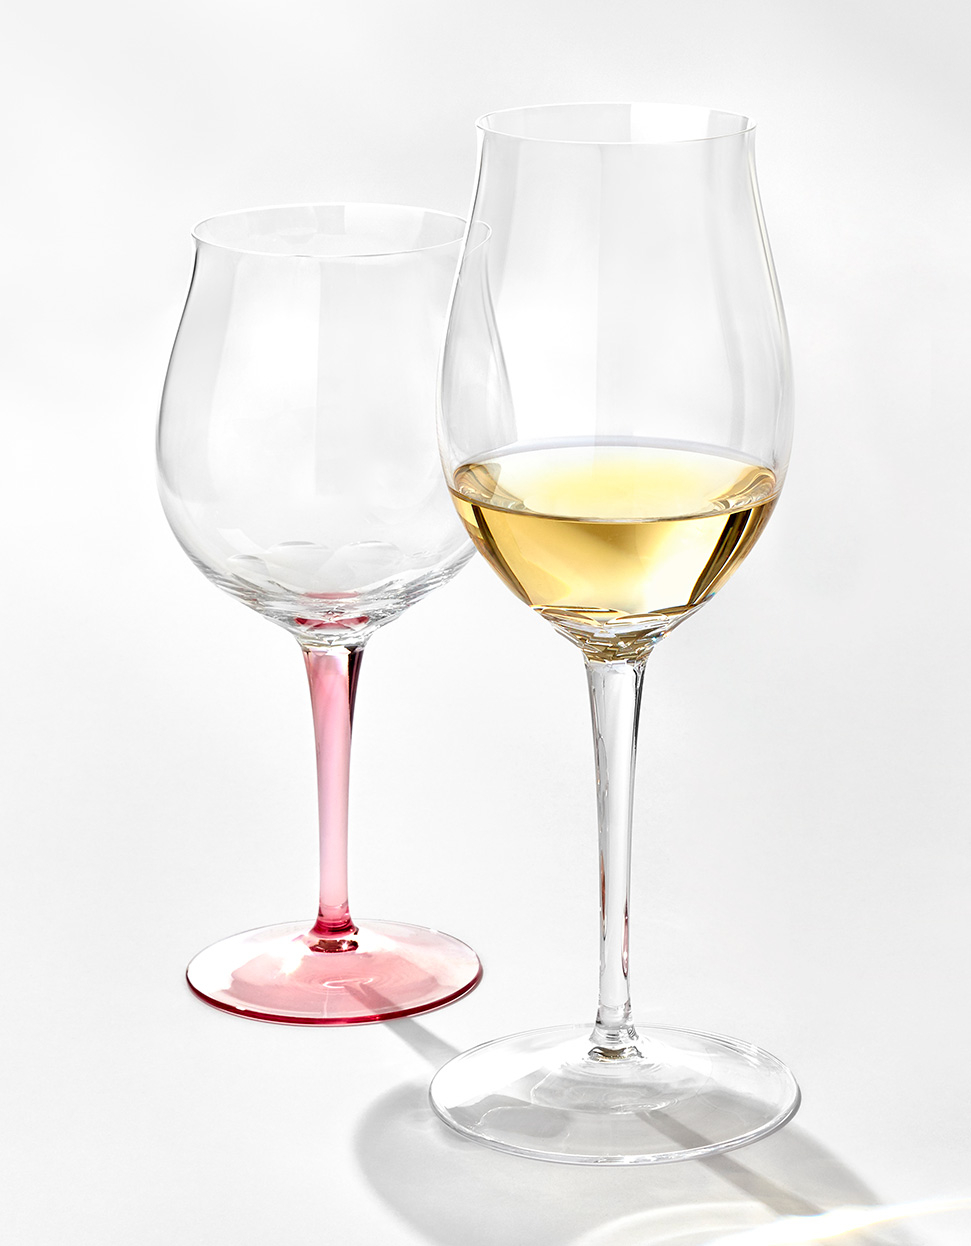 350+ Wine Glass Pictures  Download Free Images & Stock Photos on